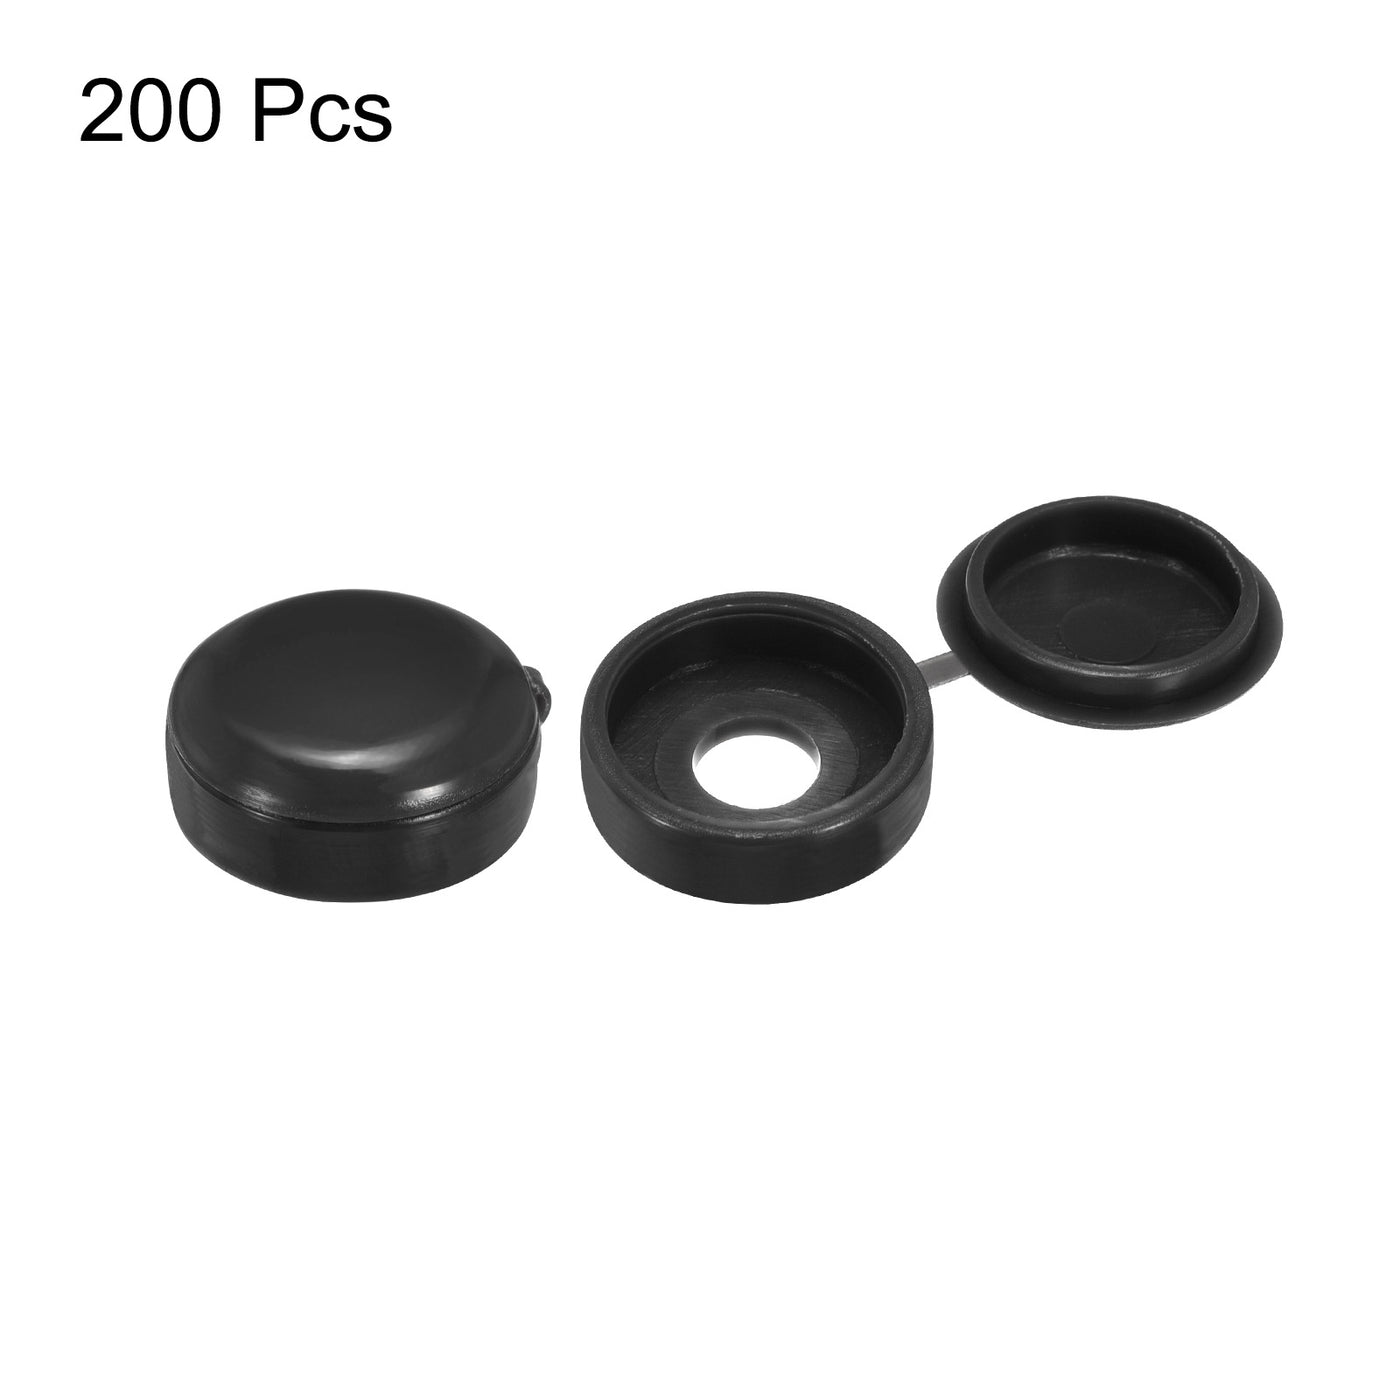 uxcell Uxcell 200Pcs 5mm Hinged Screw Cover Caps Plastic Fold Screw Snap Covers, Black